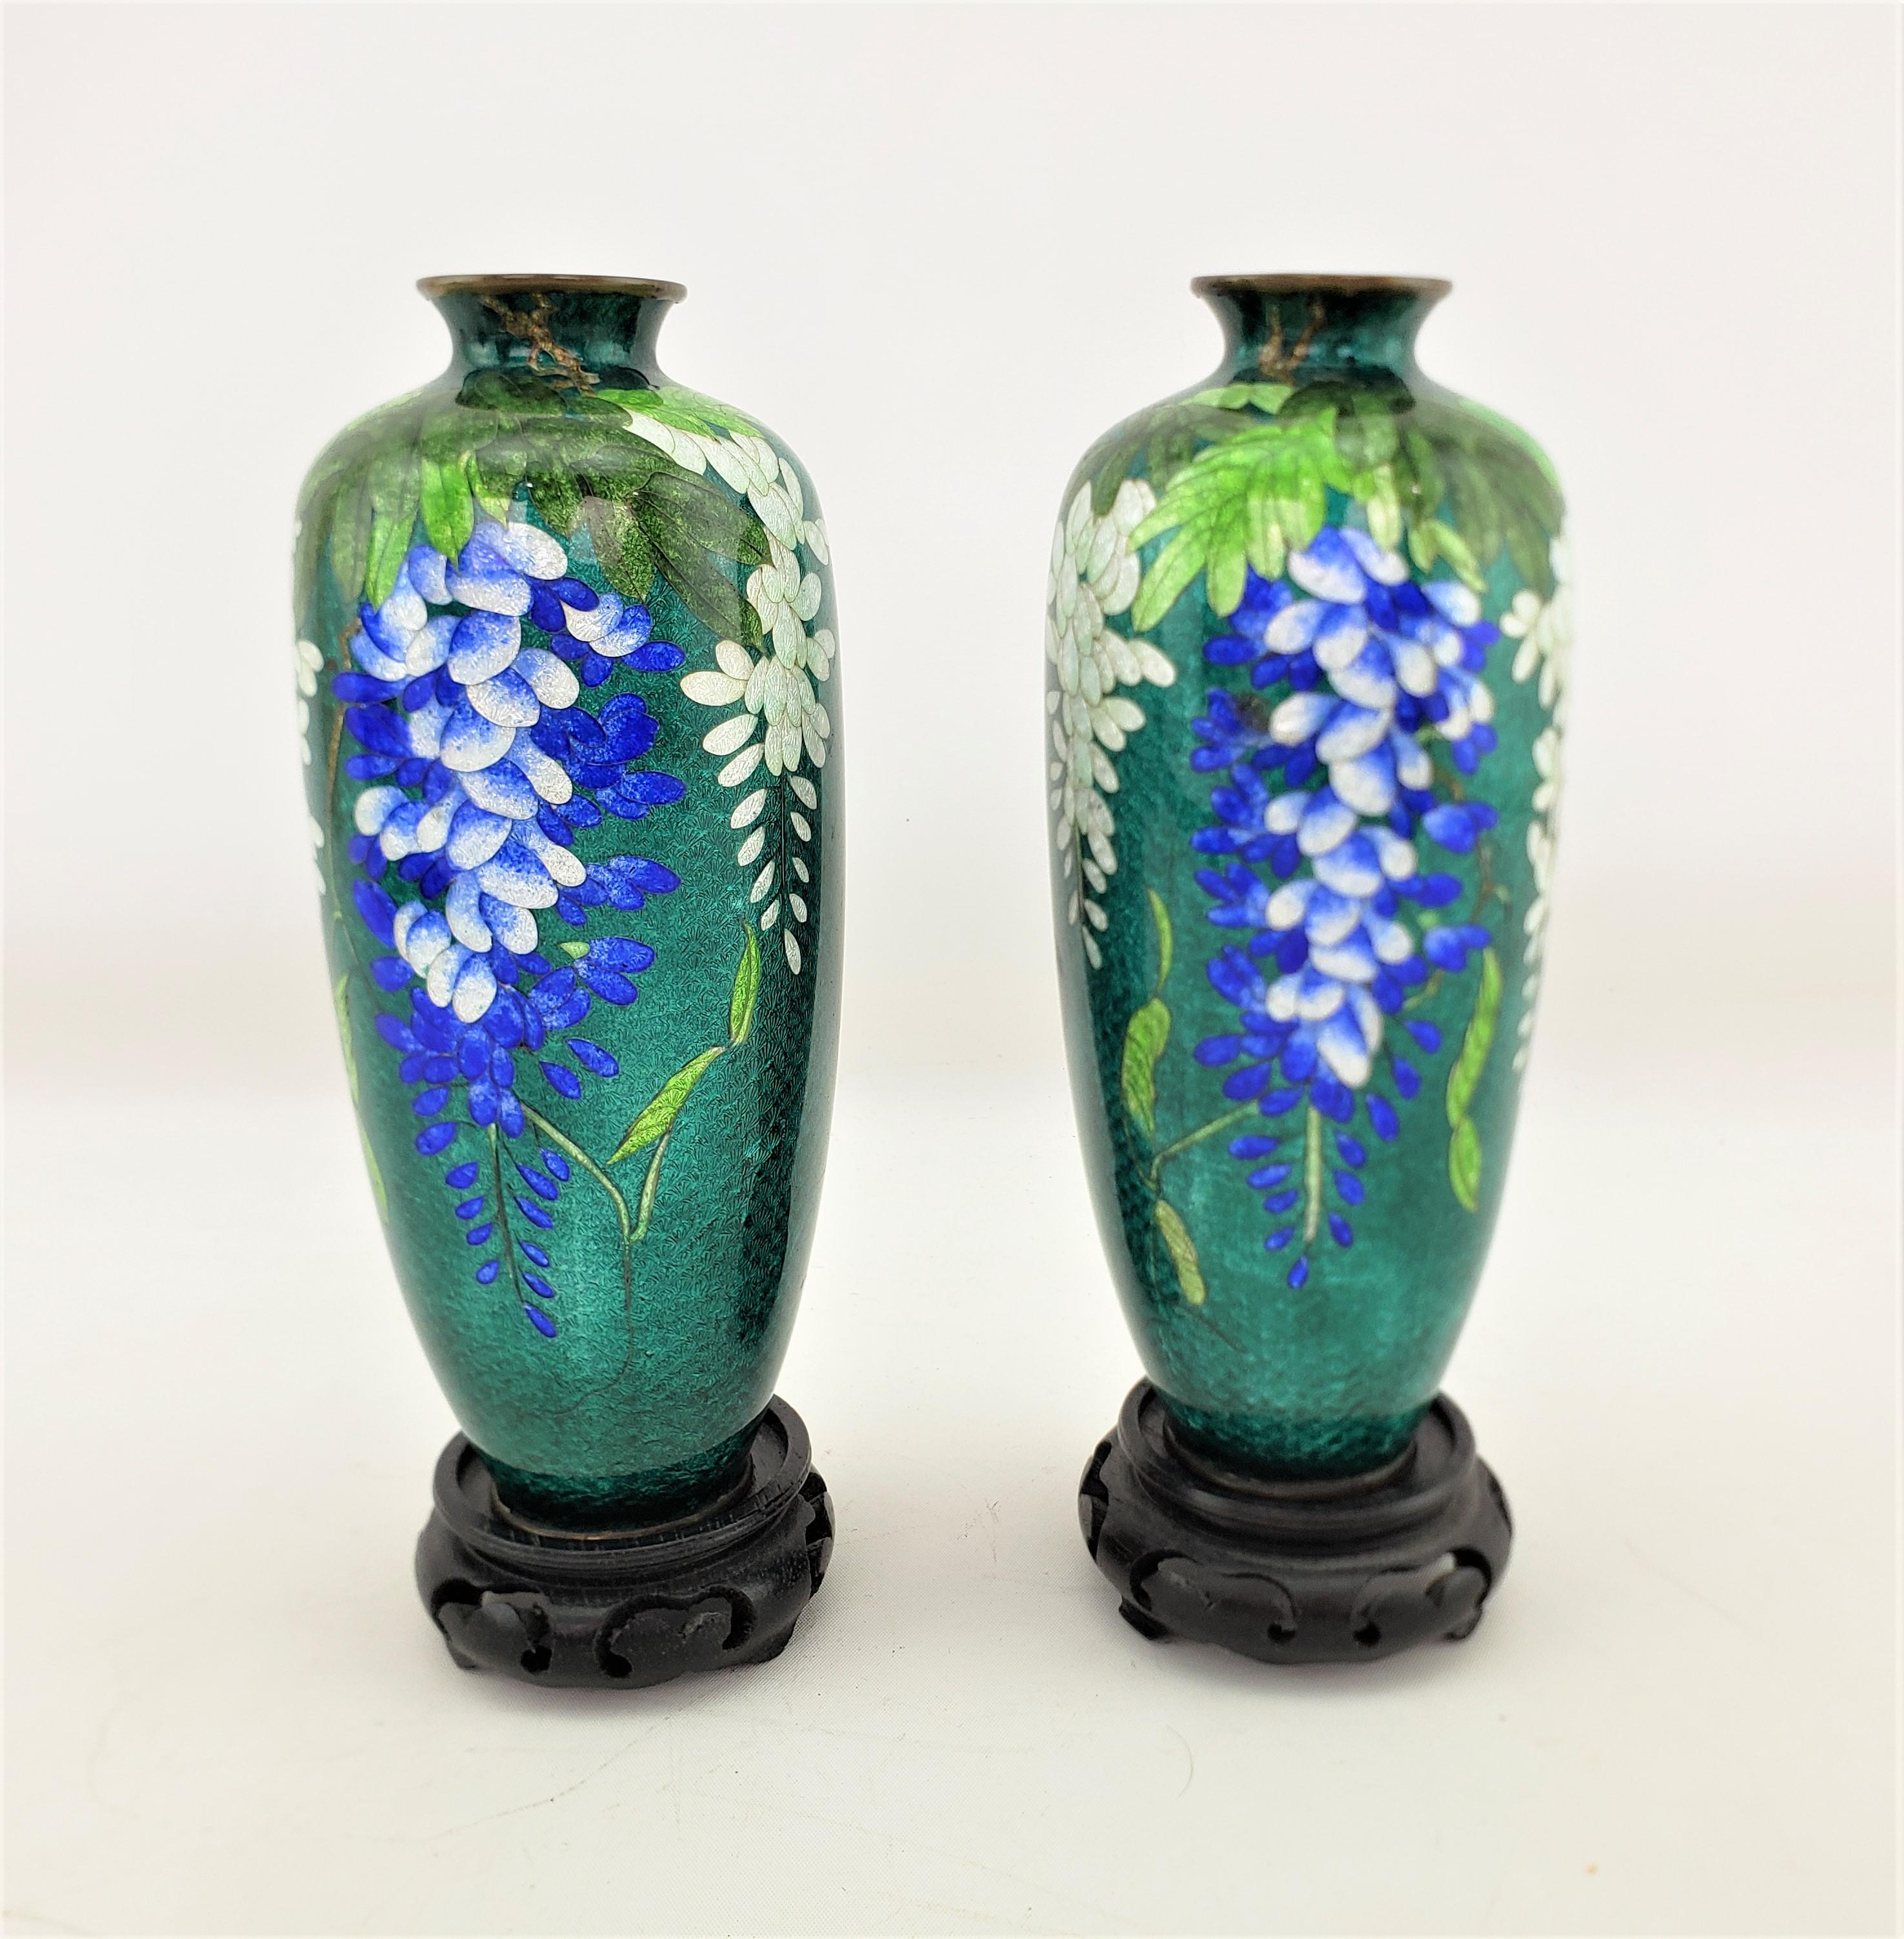 This pair of vases are unsigned, but presumed to have originated from Japan and date to approximately 1920 and done in an Anglo-Japanese style. The vases are done in engraved brass with a vibrant teal cloisonne enamel ground with bright blue and